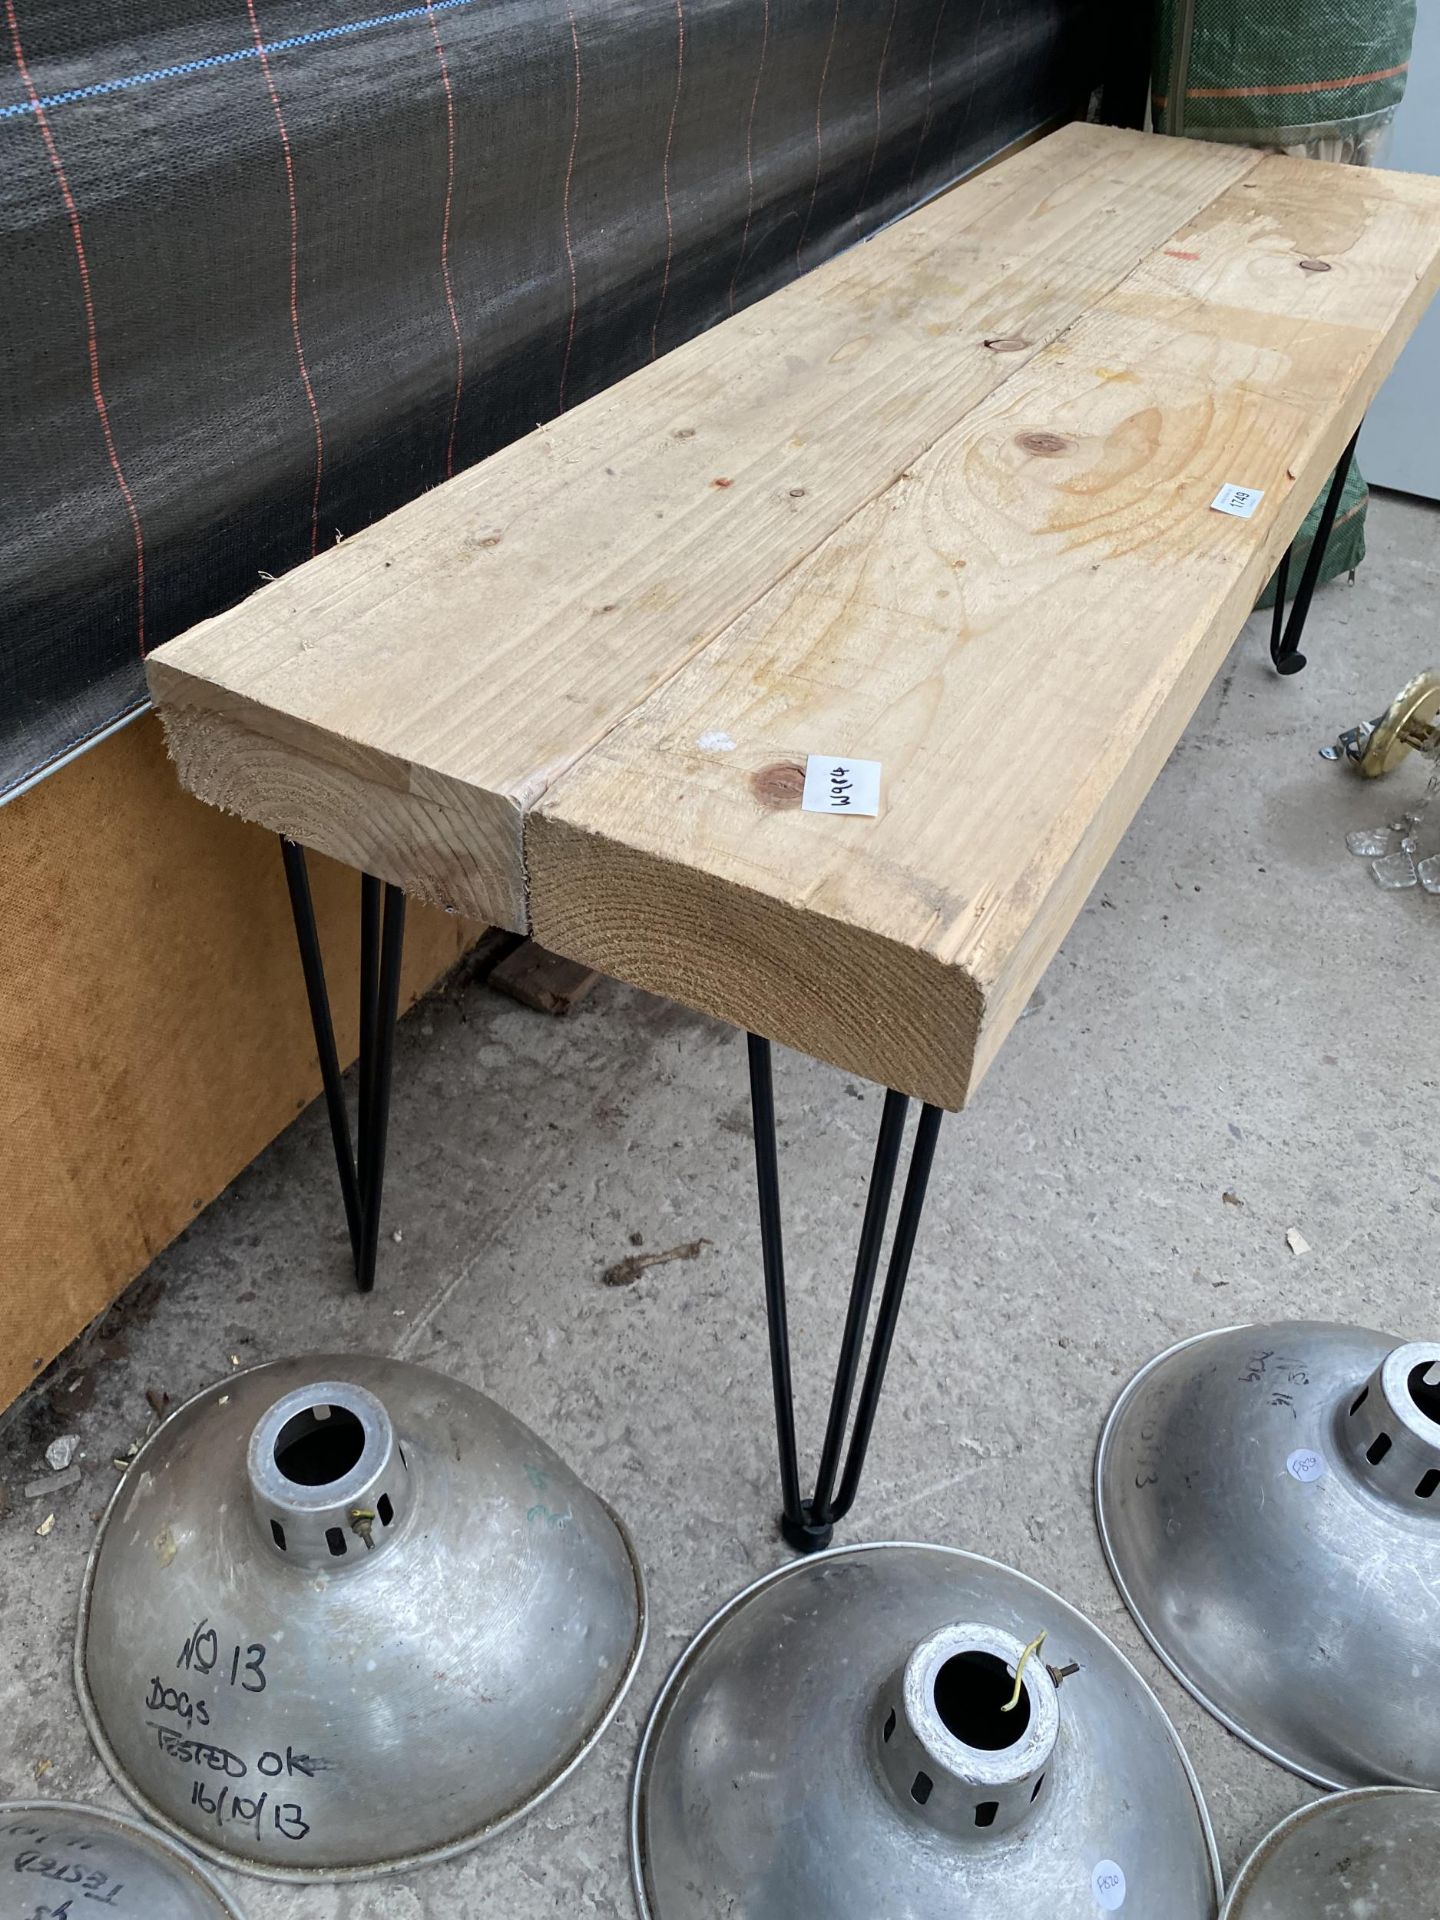 A WOODEN PLANK TOPPED BENCH WITH METAL LEGS - Image 2 of 3